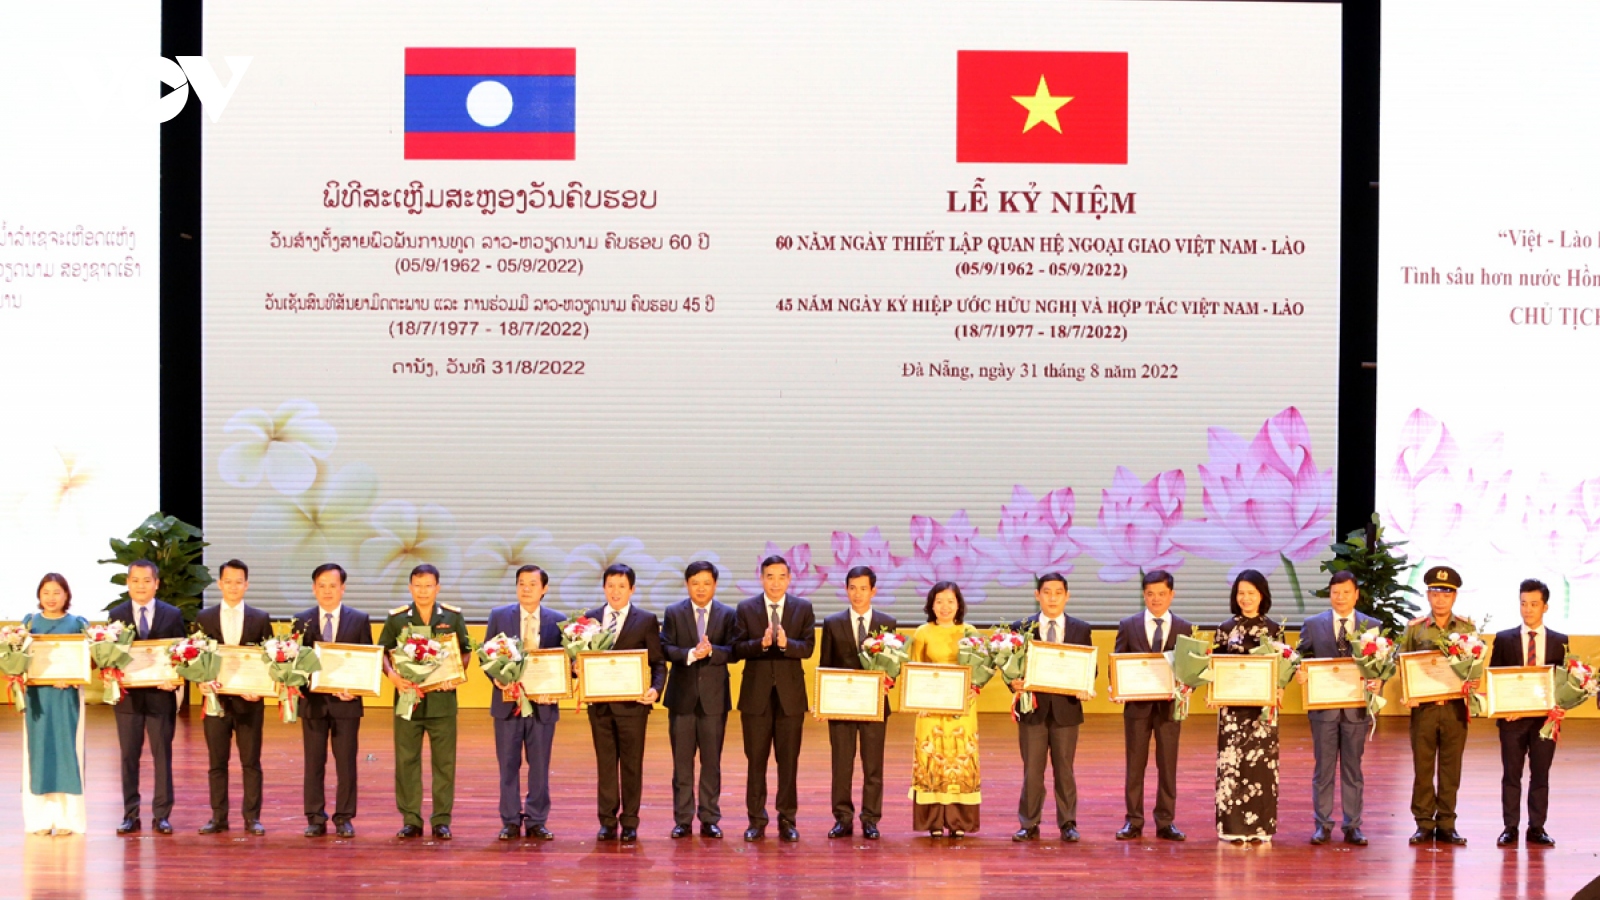 Da Nang increases cooperation with Lao localities